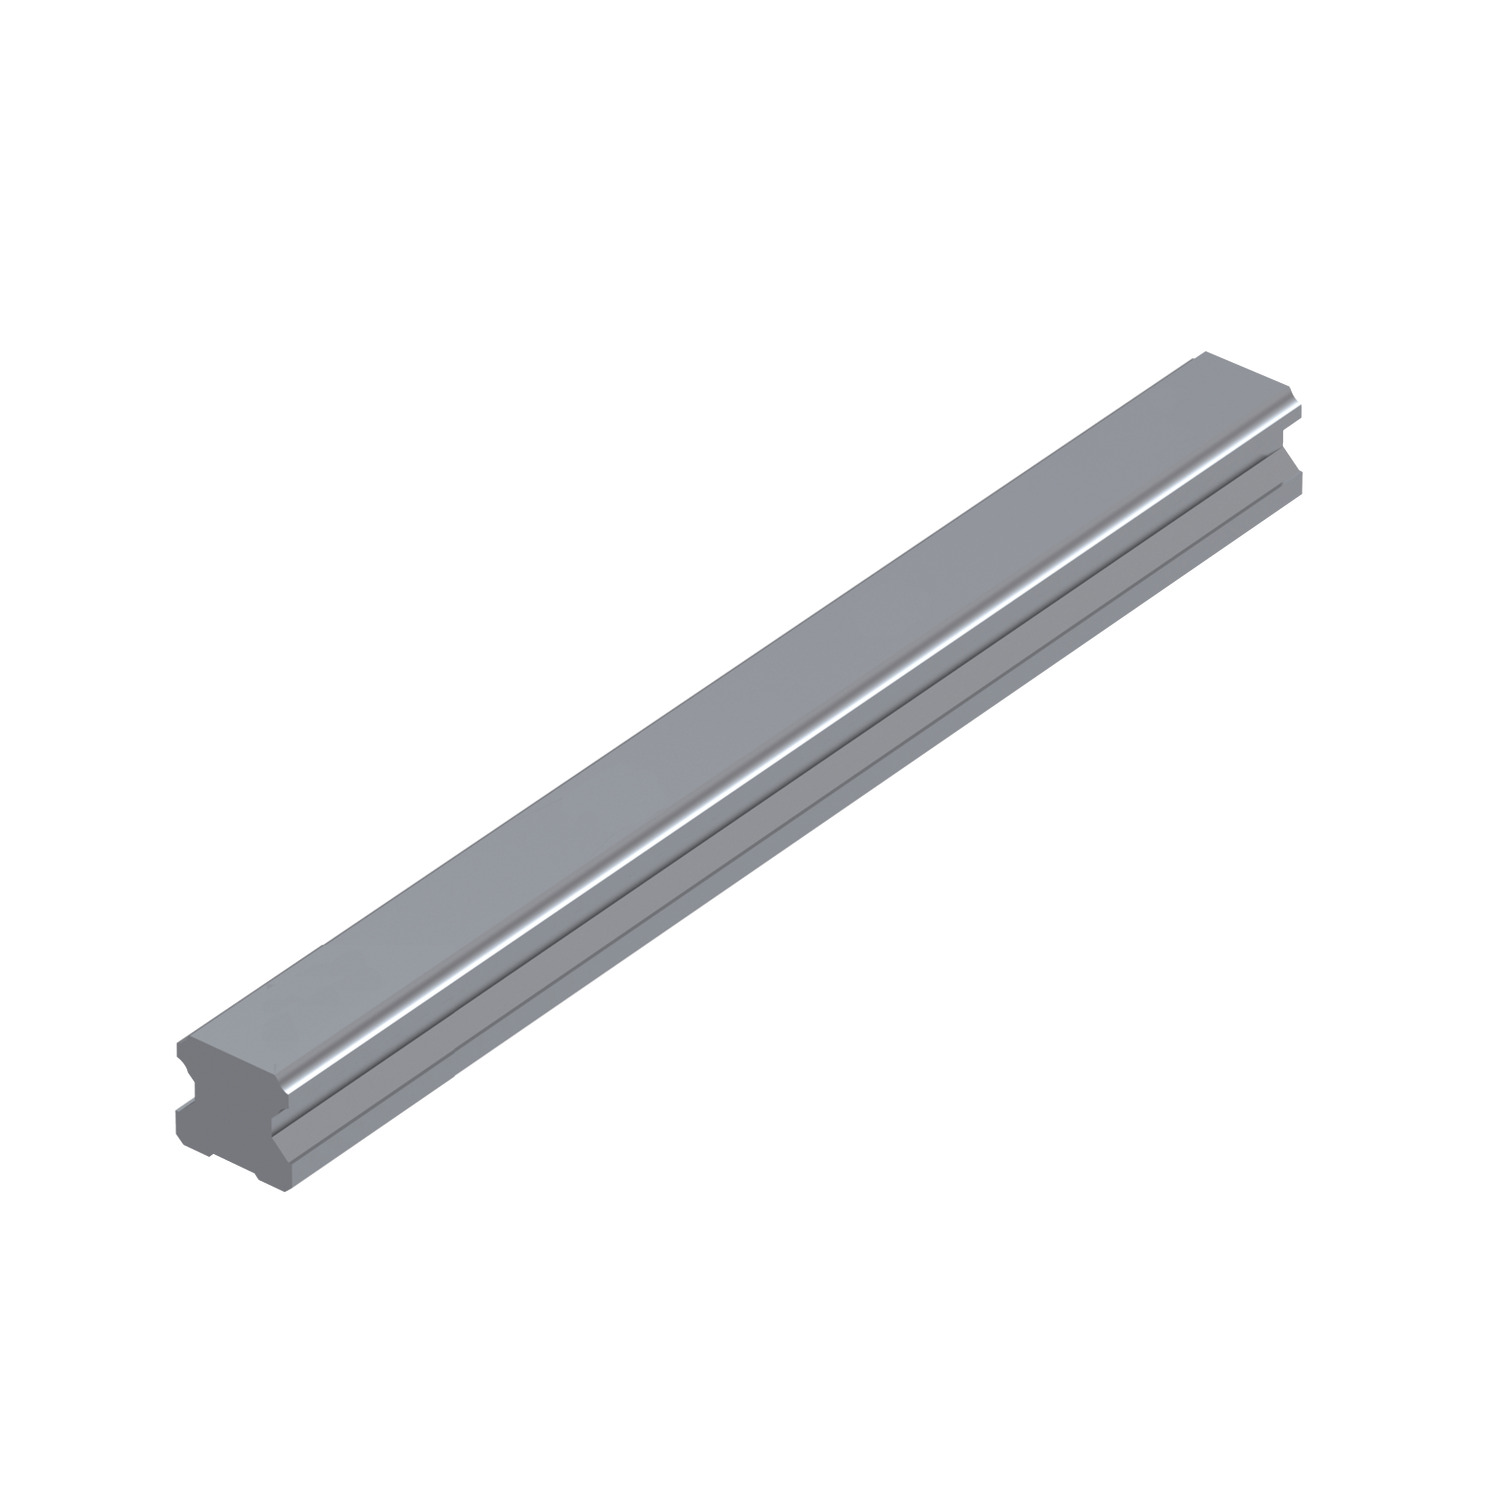 L1016.RF20-0580 Linear guide rail rear fixing 20mm 0580 Hardened and ground steel. EC:20166748 WG:05063055295390